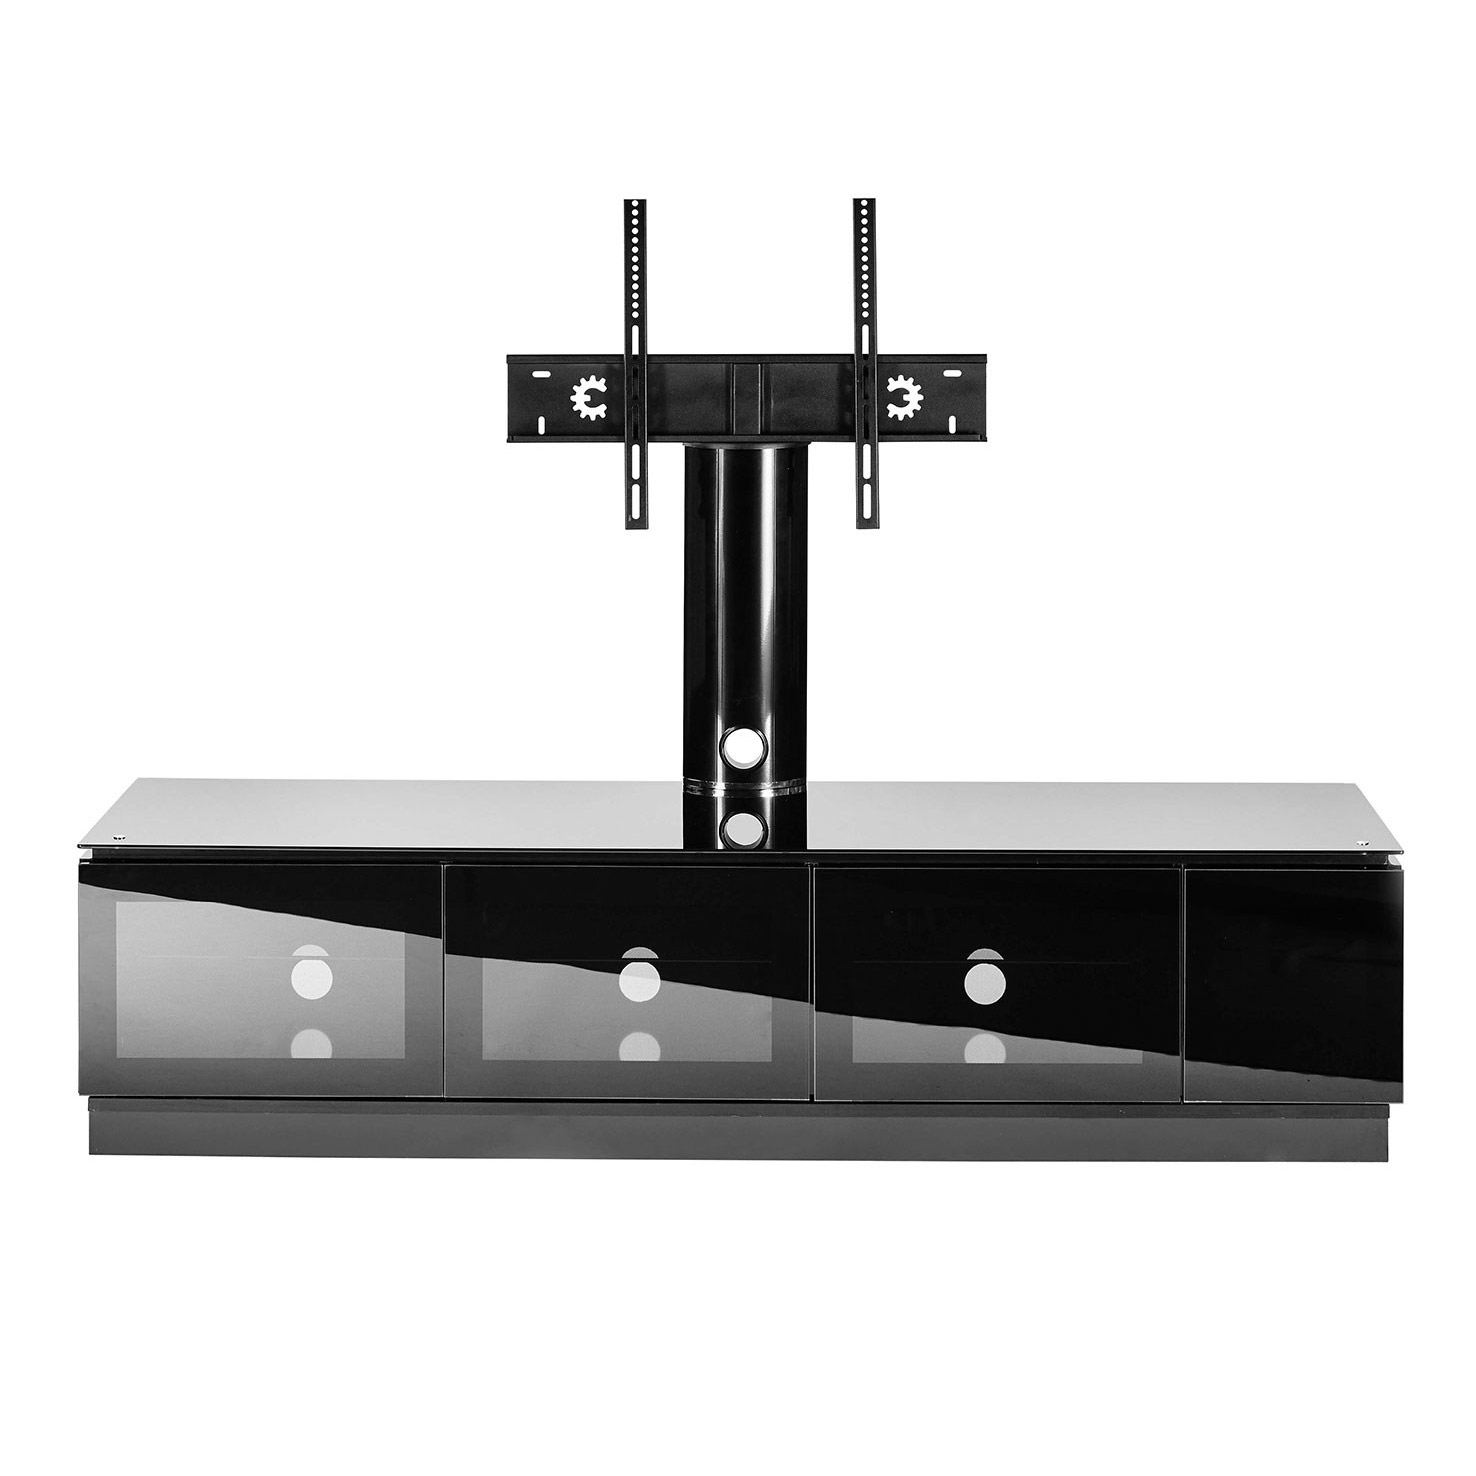 Image of MMT DXARM BLK Extension Arm for Diamond Range Casino with Swivel